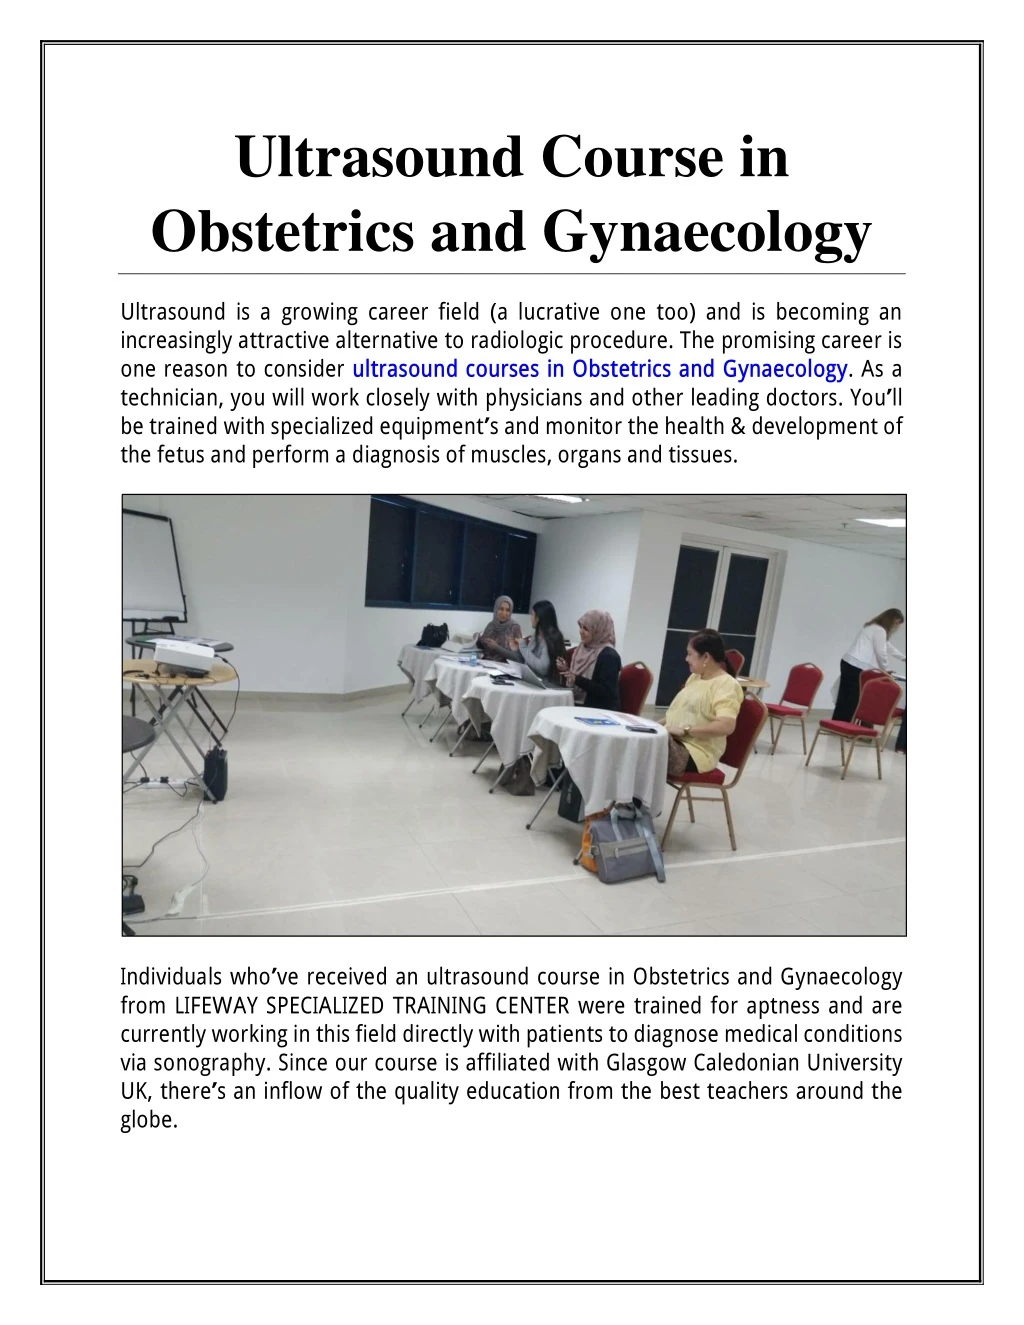 ultrasound course in obstetrics and gynaecology